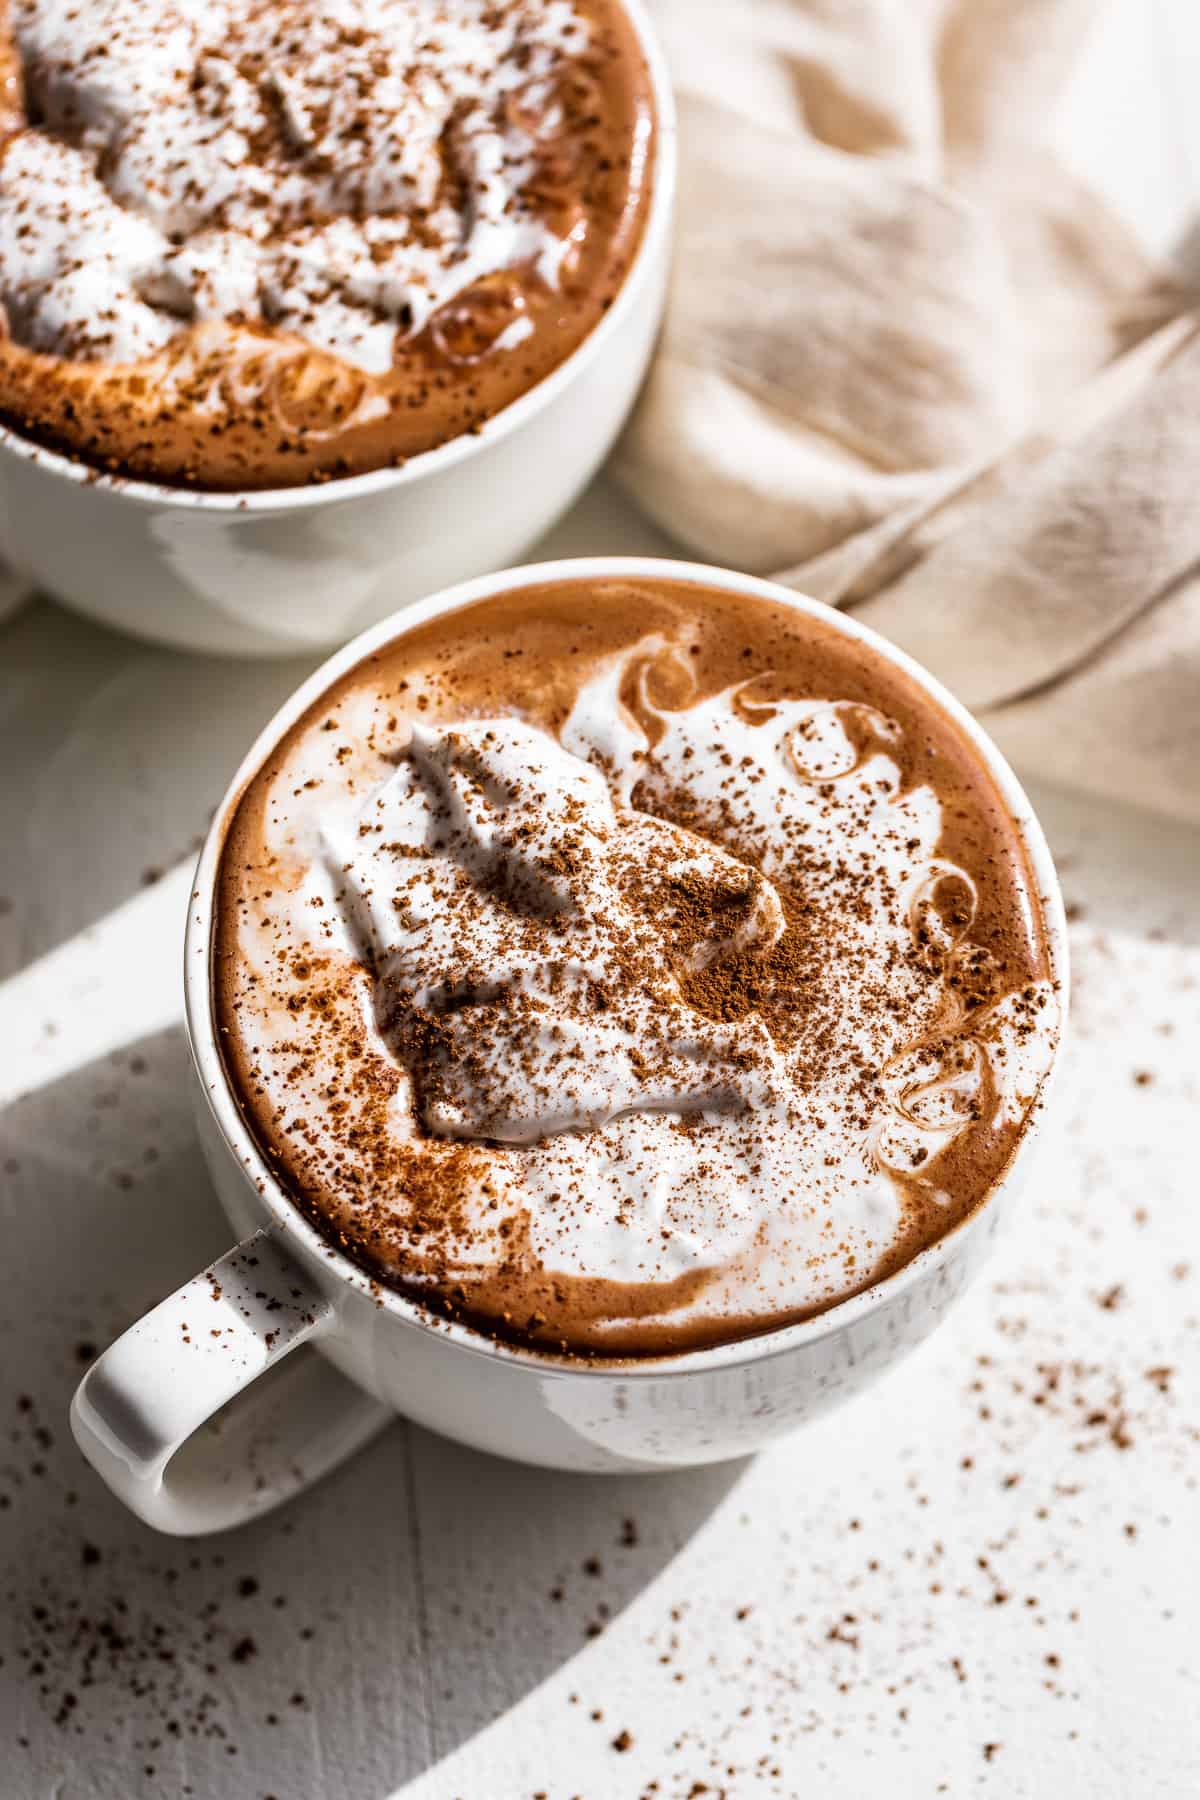 Downward view of two mugs of hot chocolate topped with whipped cream.